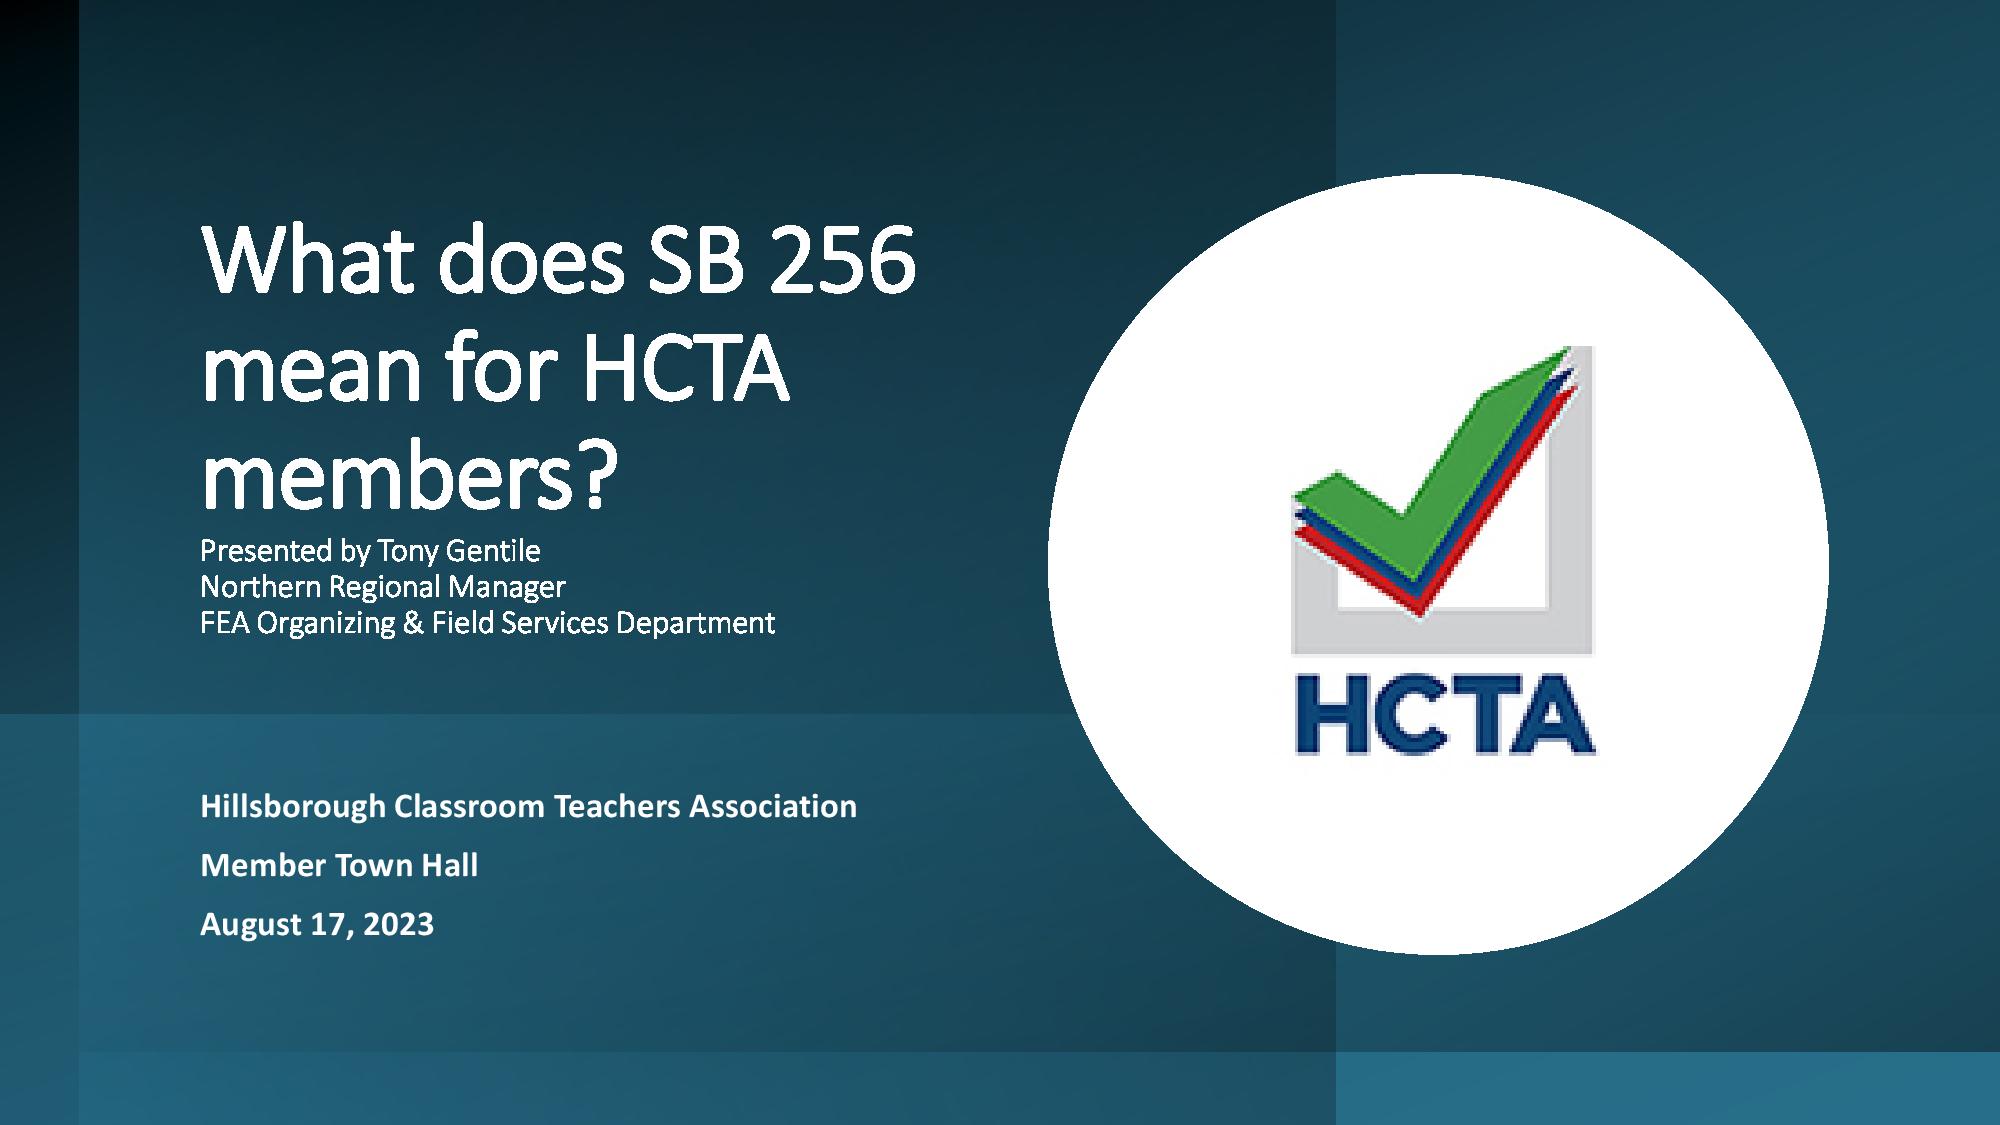 What does SB 256 mean for HCTA members? HCTA